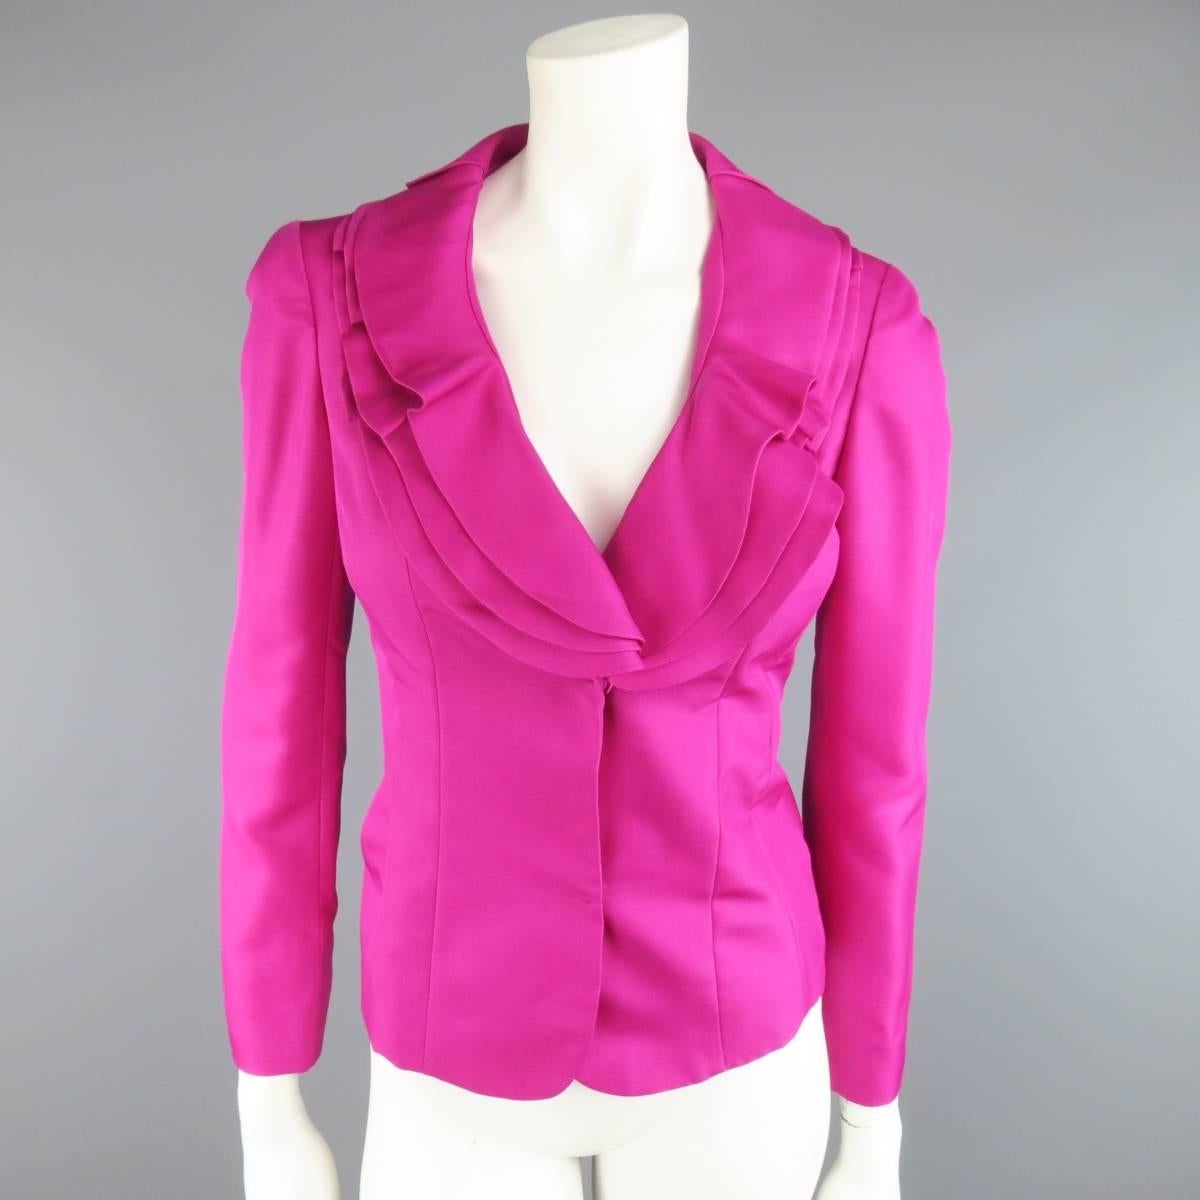 This lovely VALENTINO suit comes in a bold fuchsia pink textured silk taffeta and includes a jacket with hidden two snap closure and layered ruffle collar and matching pencil skirt. Made in Italy.
 
New with Tags.
Marked: 4
 
Measurements:

-Jacket: